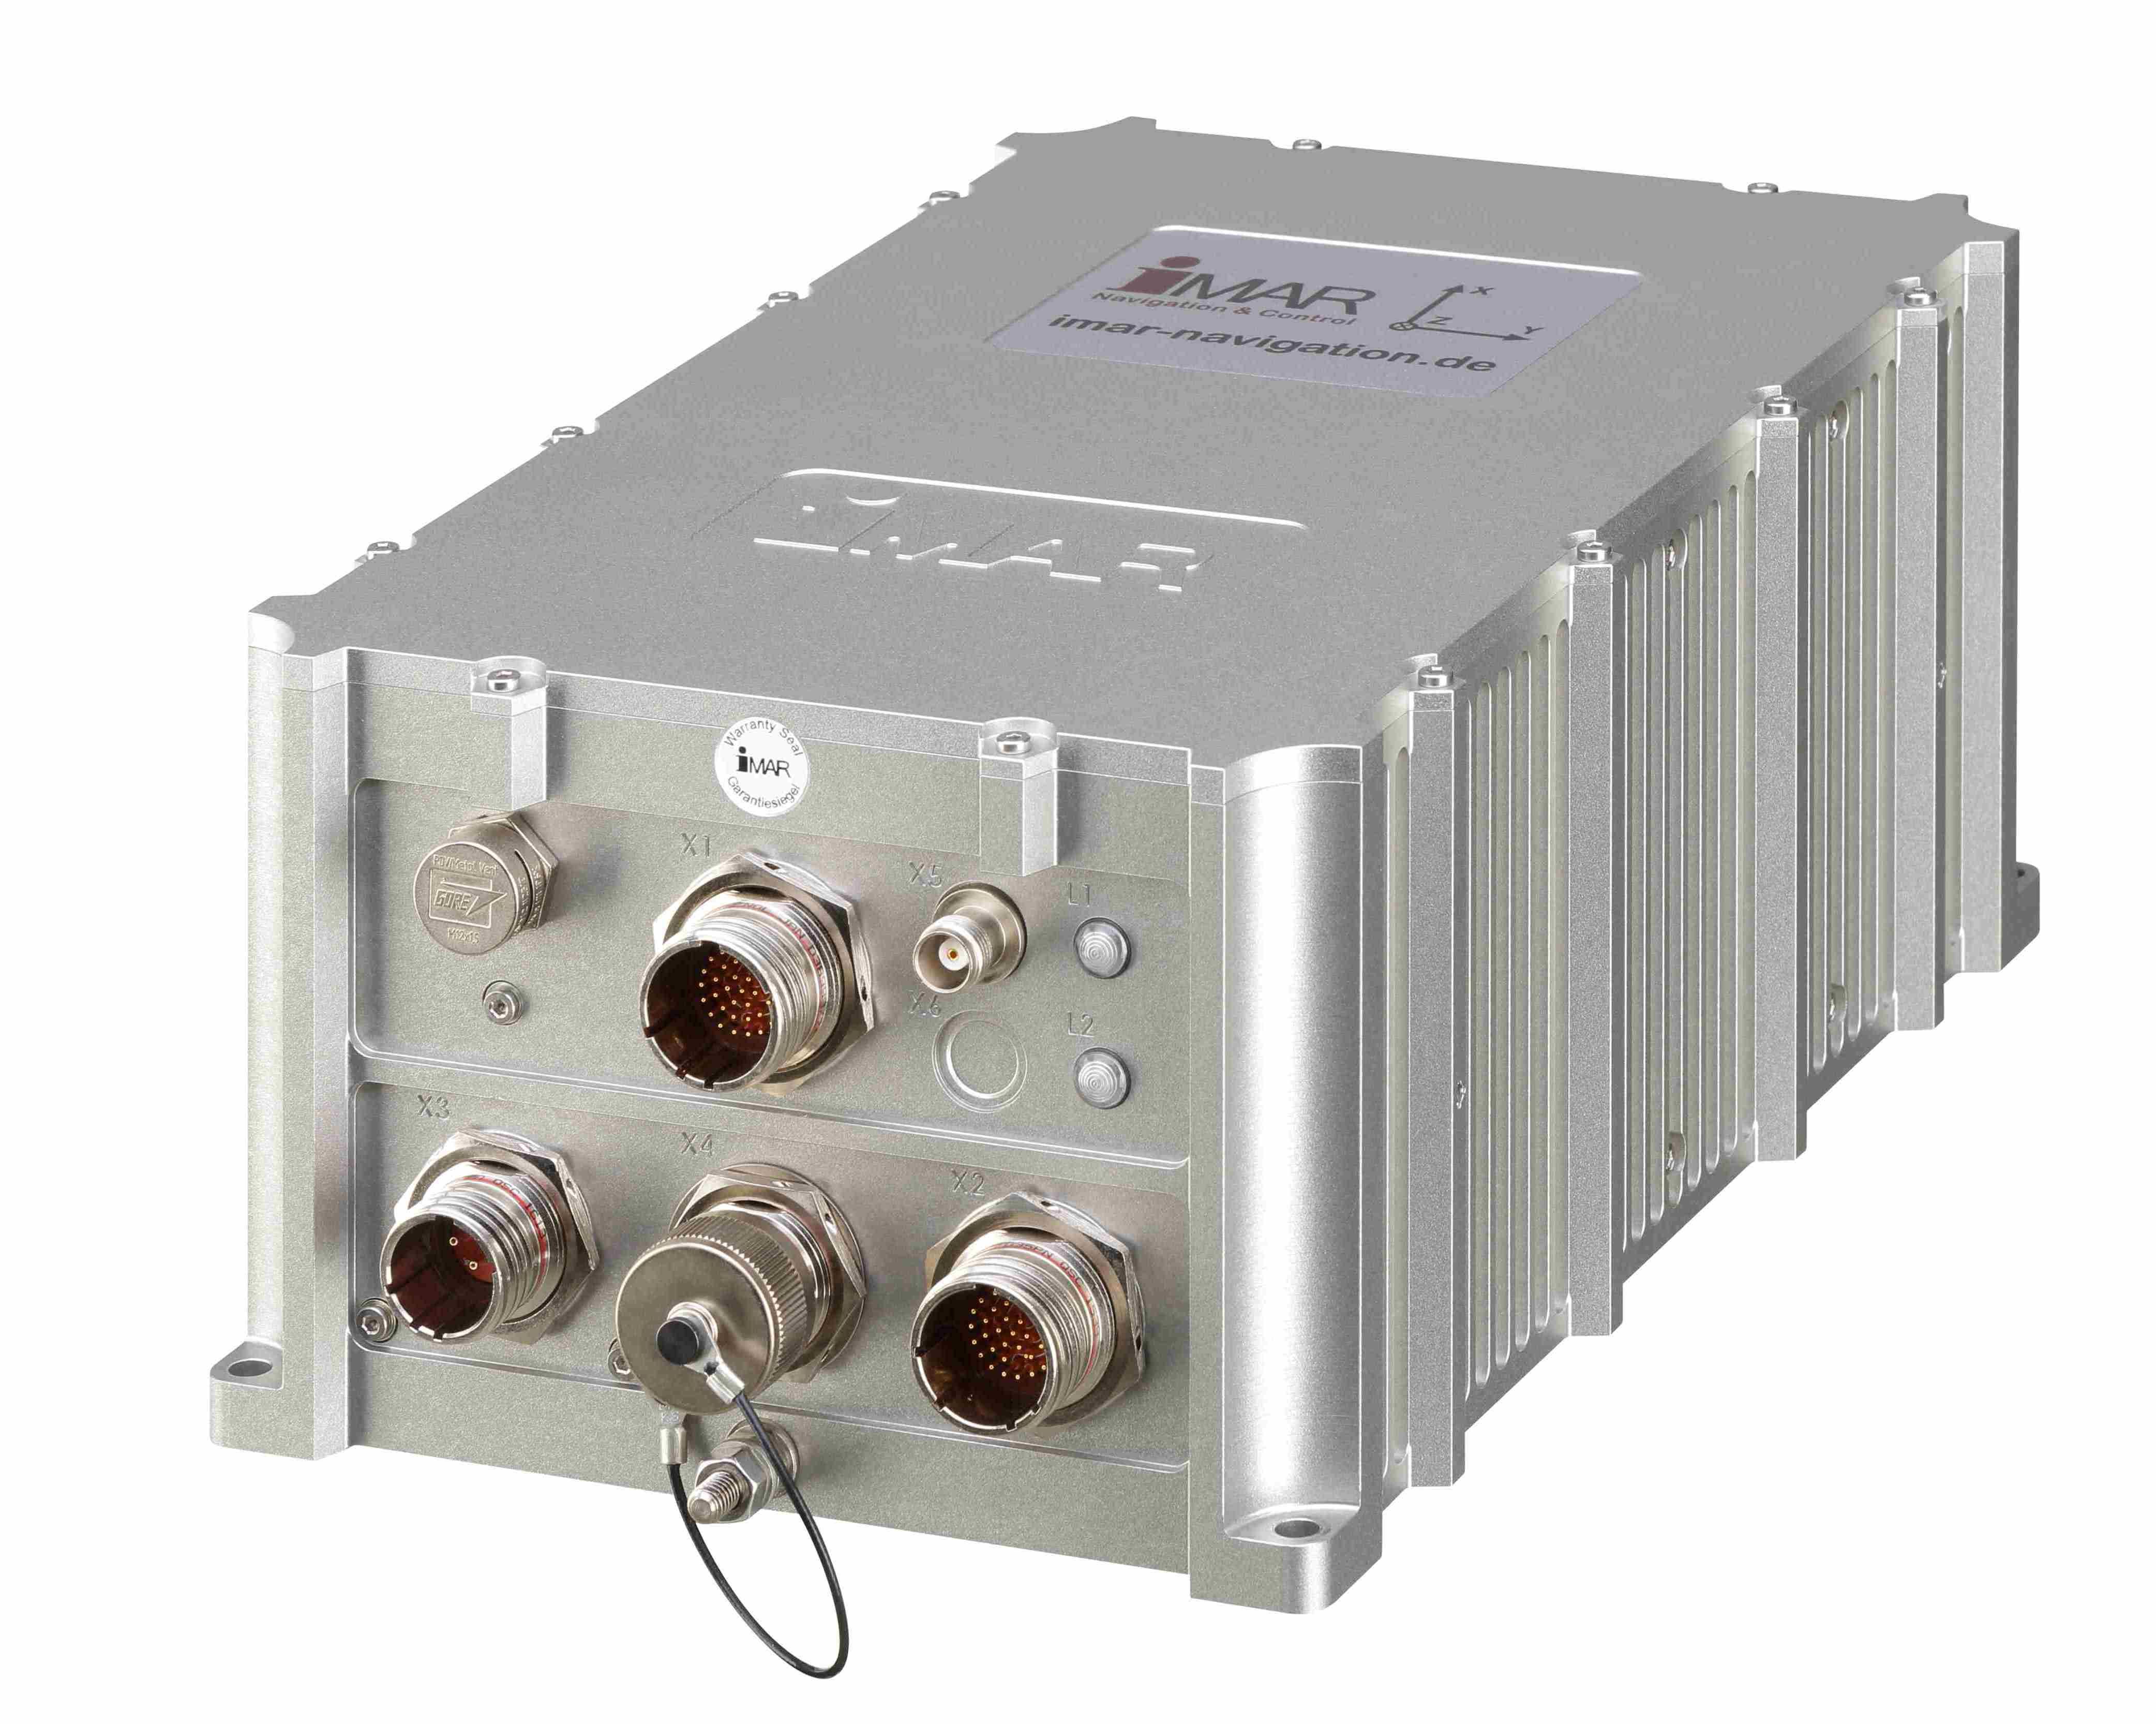 Ring Laser Gyro based high performance navigation and control systems: iNAT-RQT, iNAT-RQH with integrated RTK GNSS receiver (with optional SAASM capability)